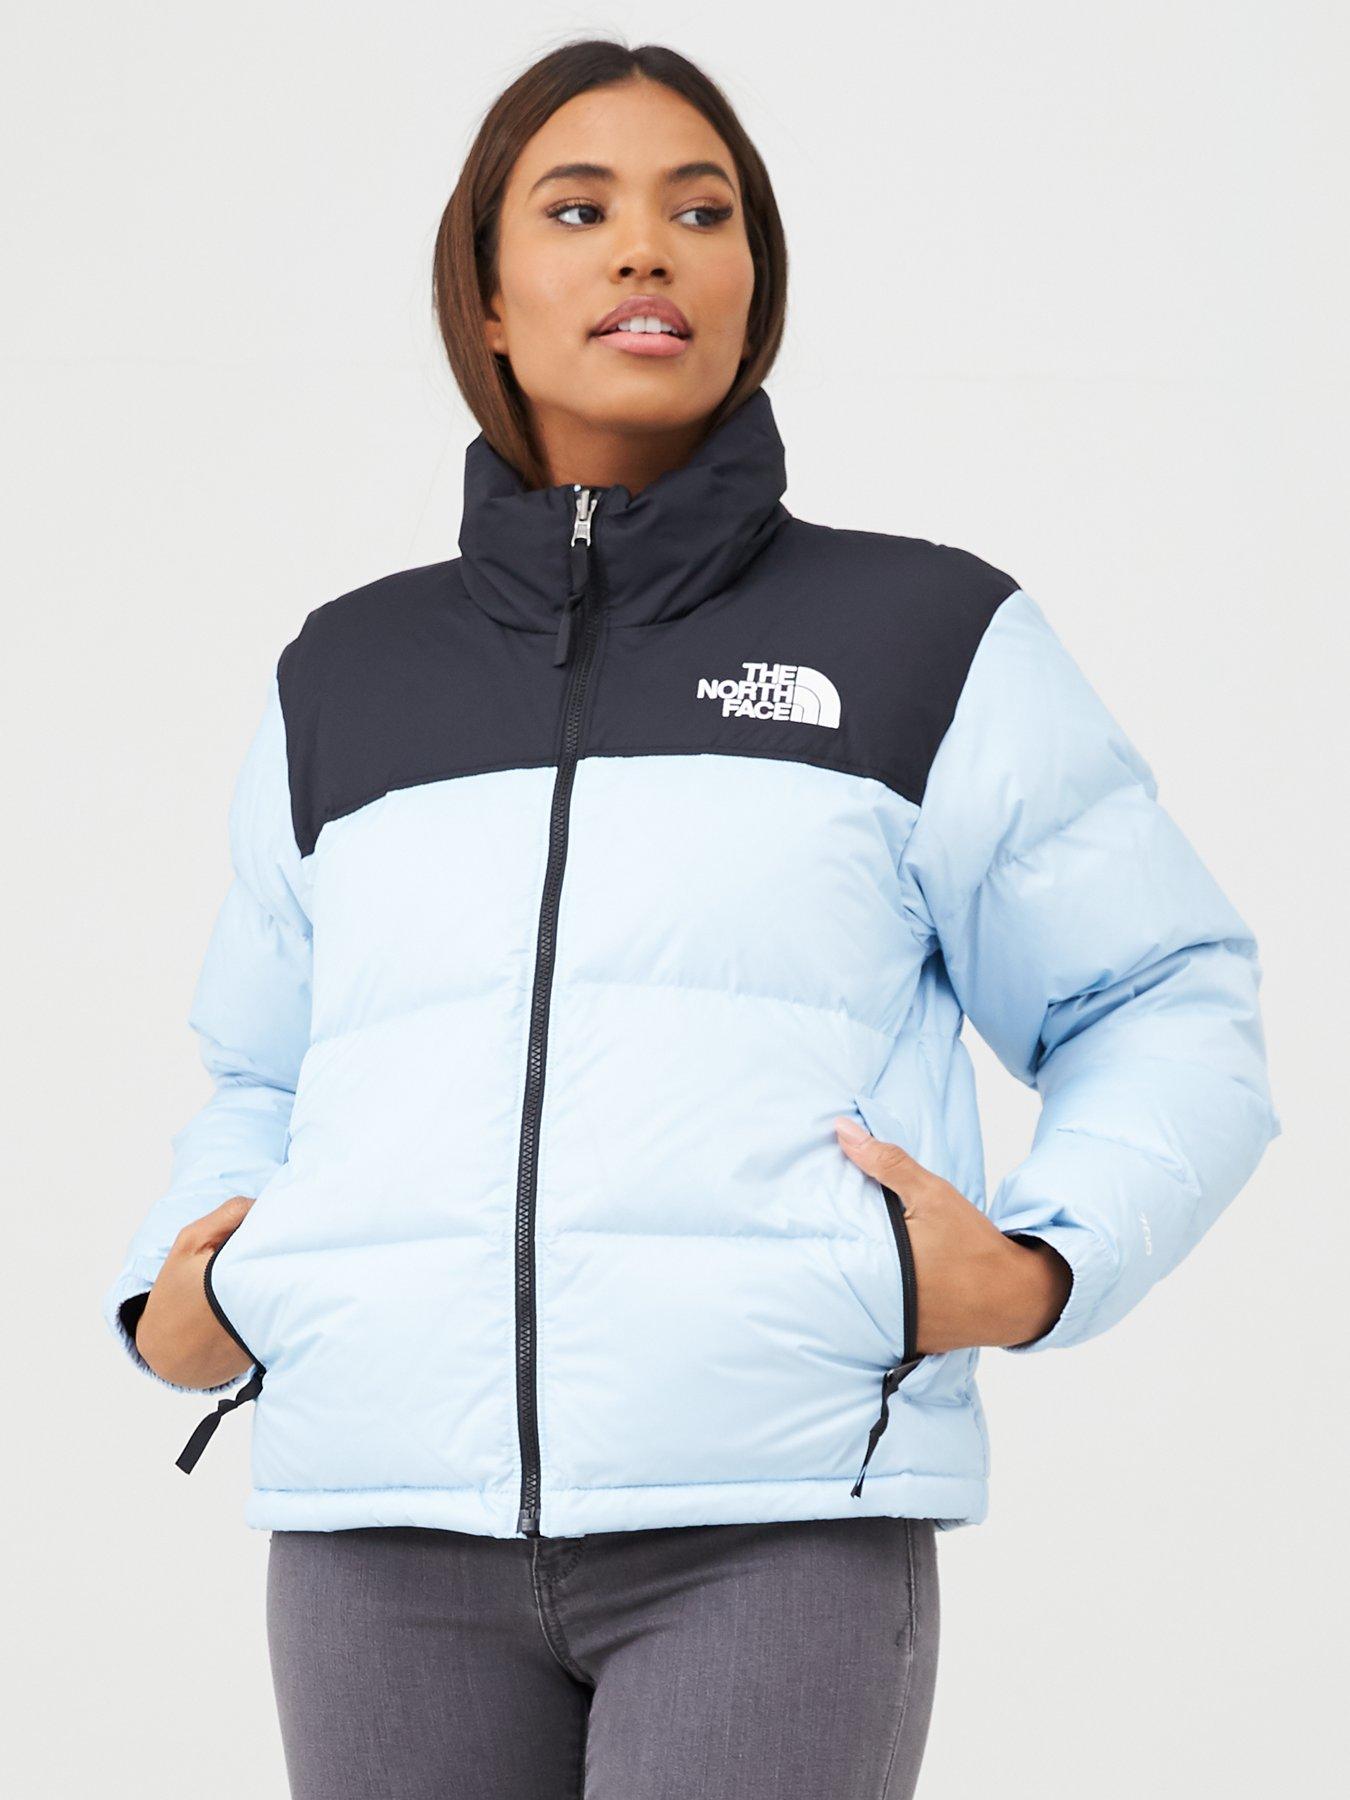 baby blue north face jacket